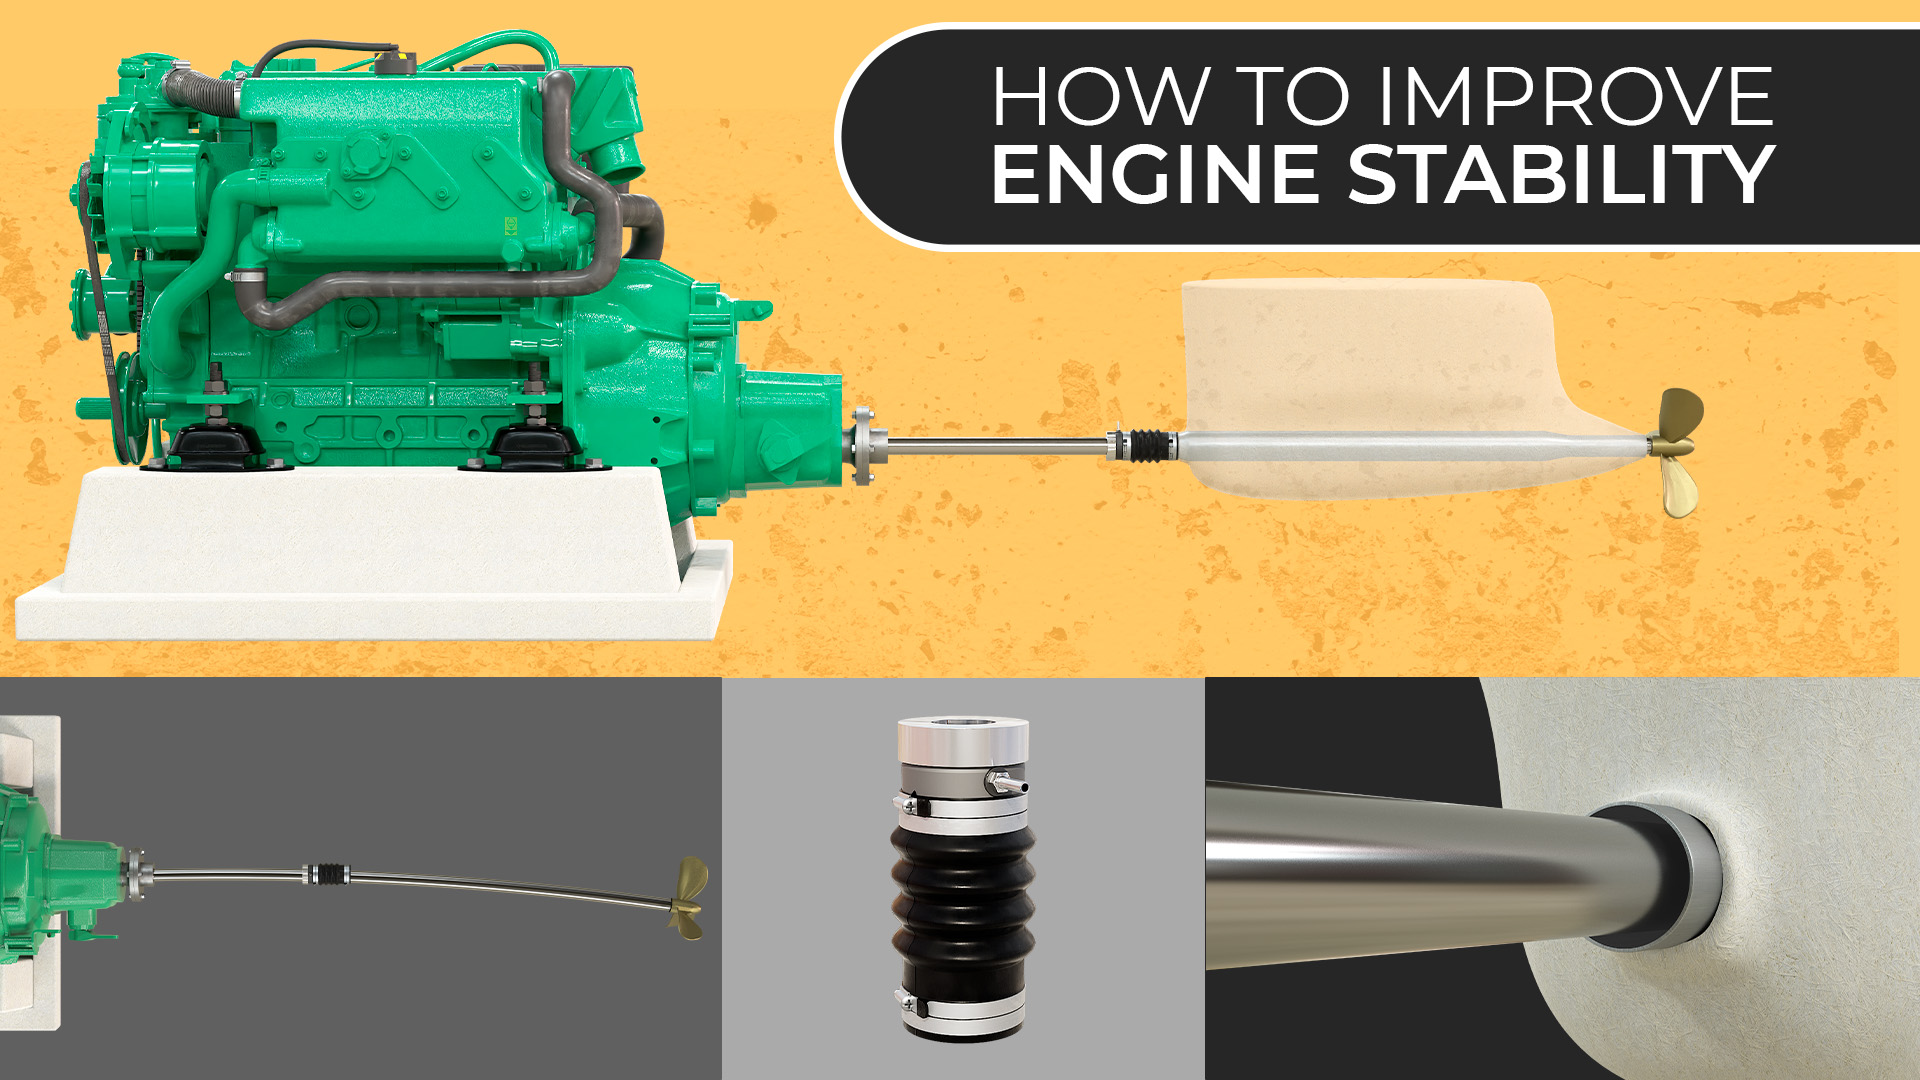 HOW TO IMPROVE ENGINE STABILITY